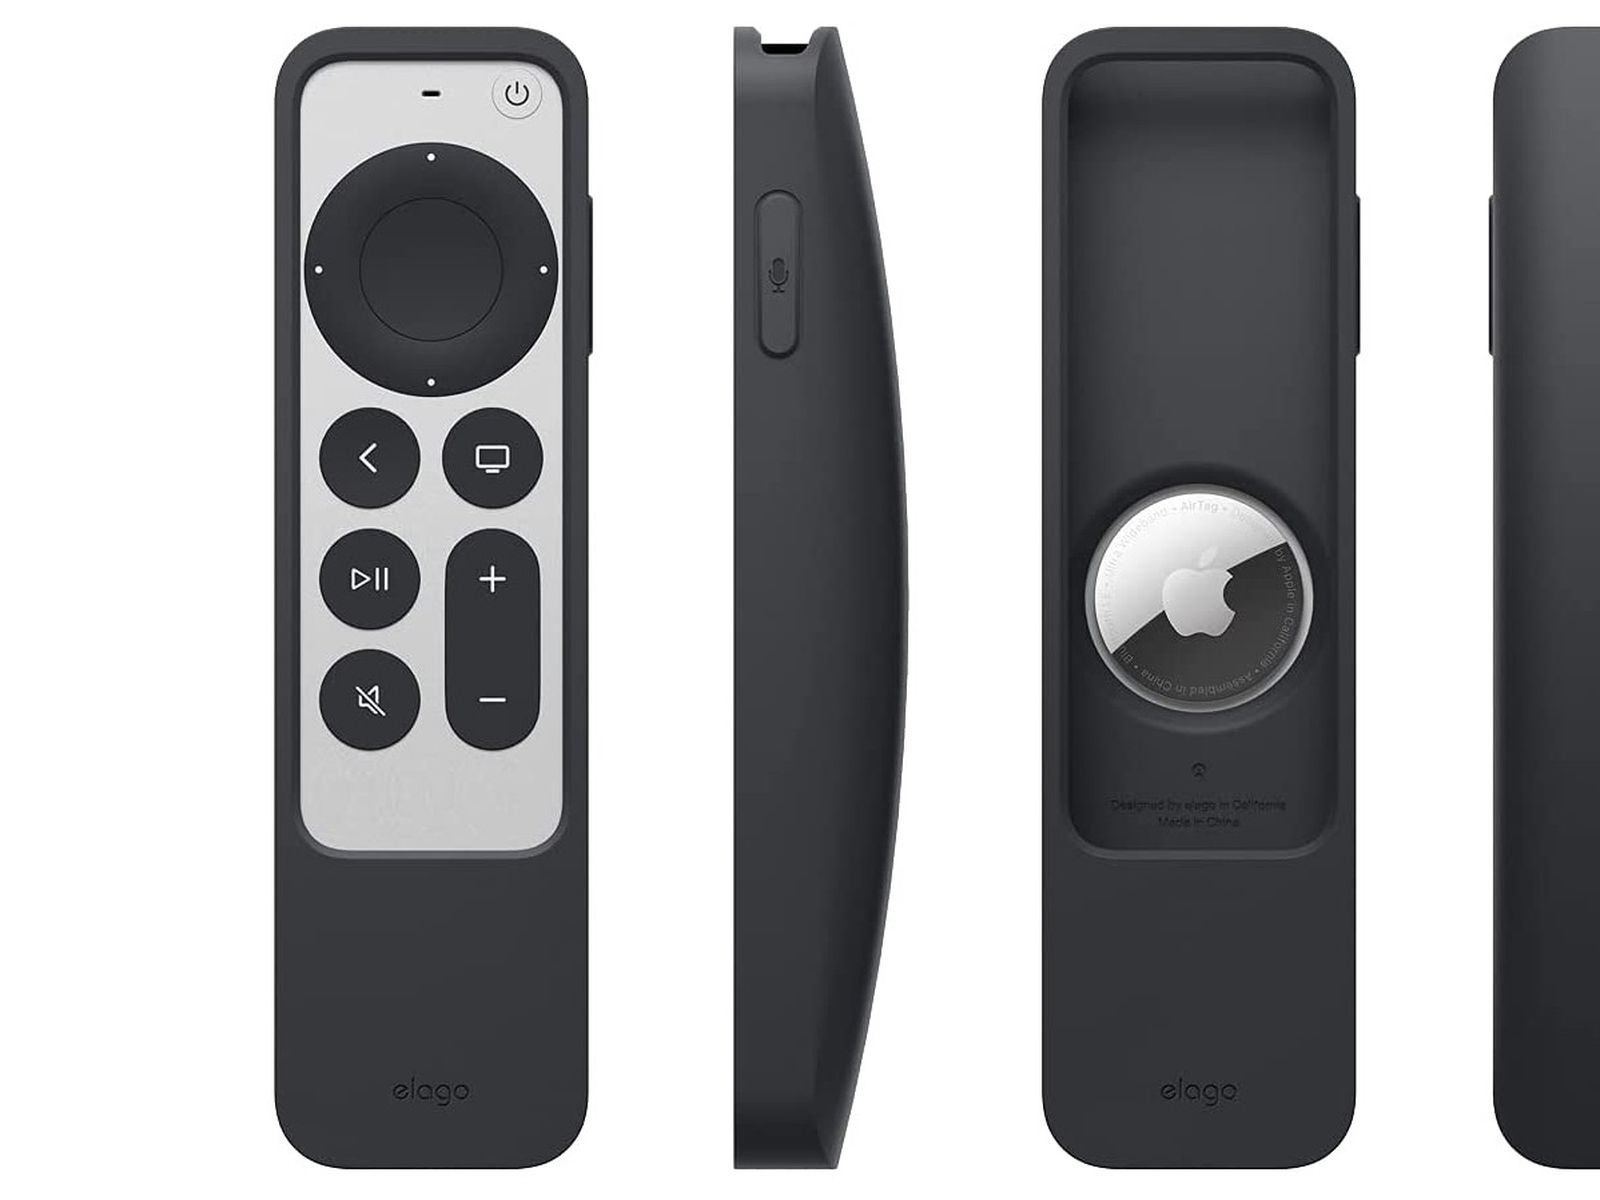 You Won't Lose Your Apple TV Remote With Elago's New Remote Case